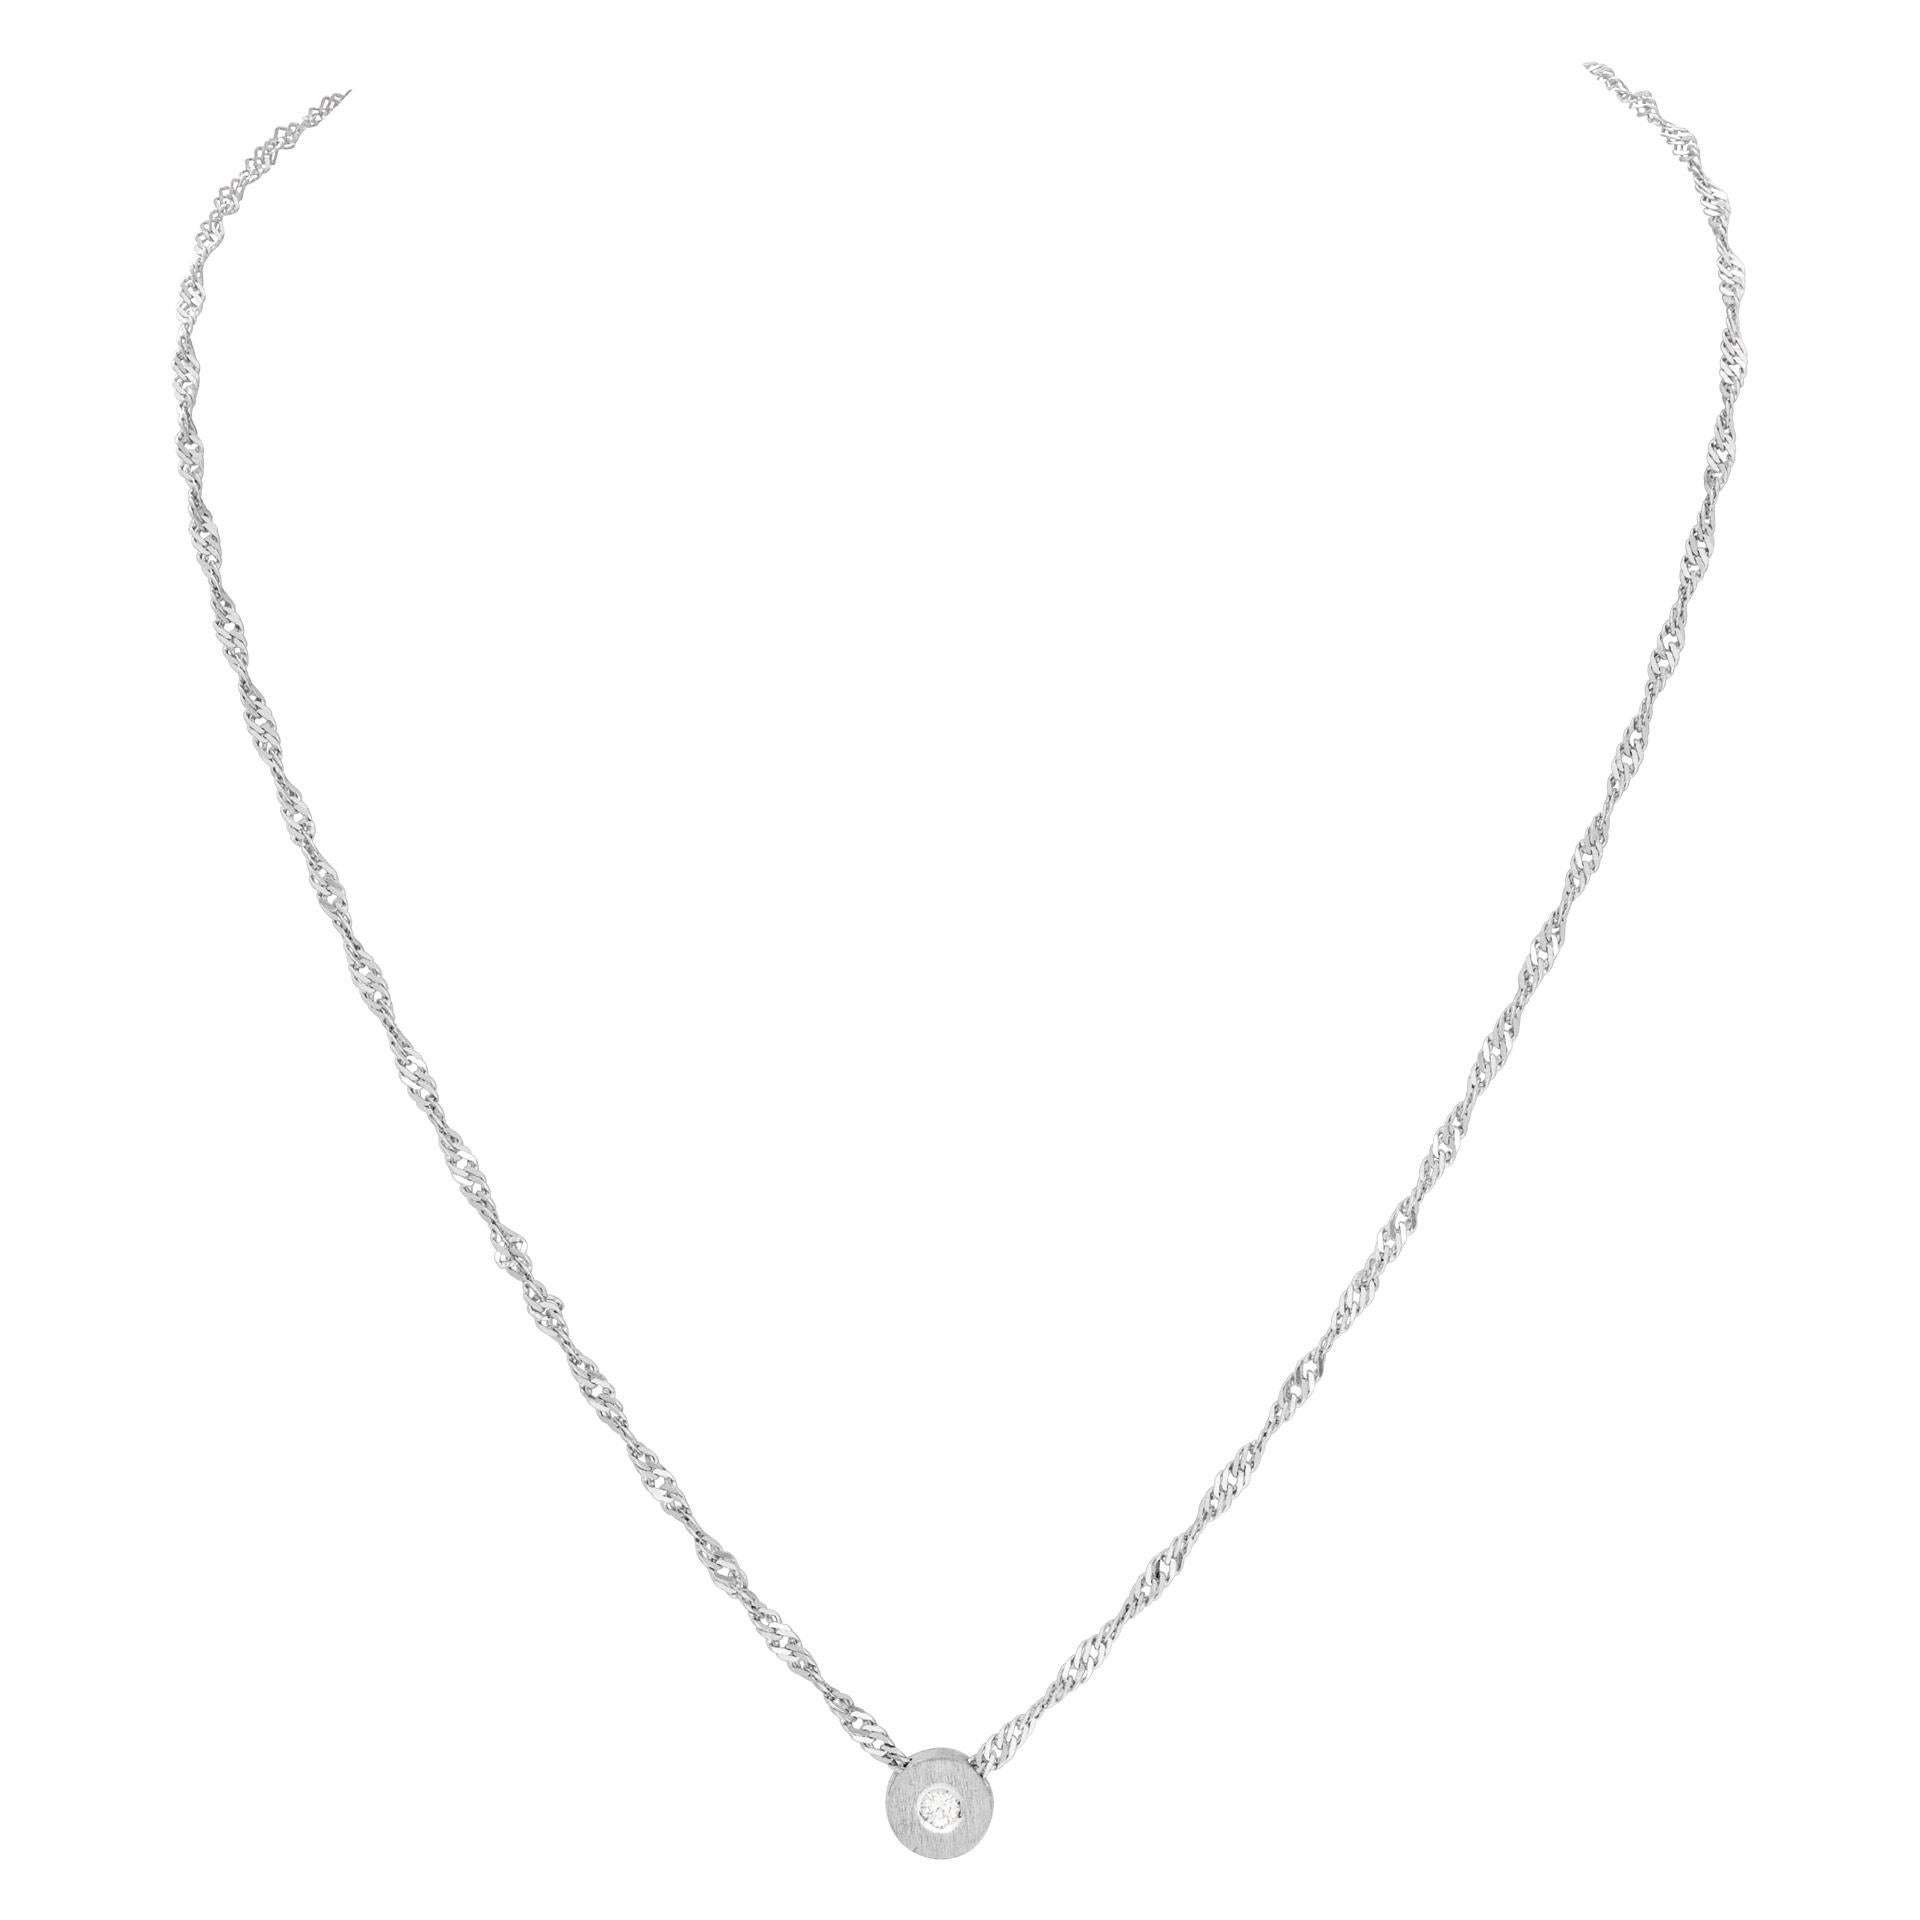 Delicate diamond pendant necklace on an 18k white gold chain with single 0.10 carat G-H color, VS clarity diamond. Length 17.5